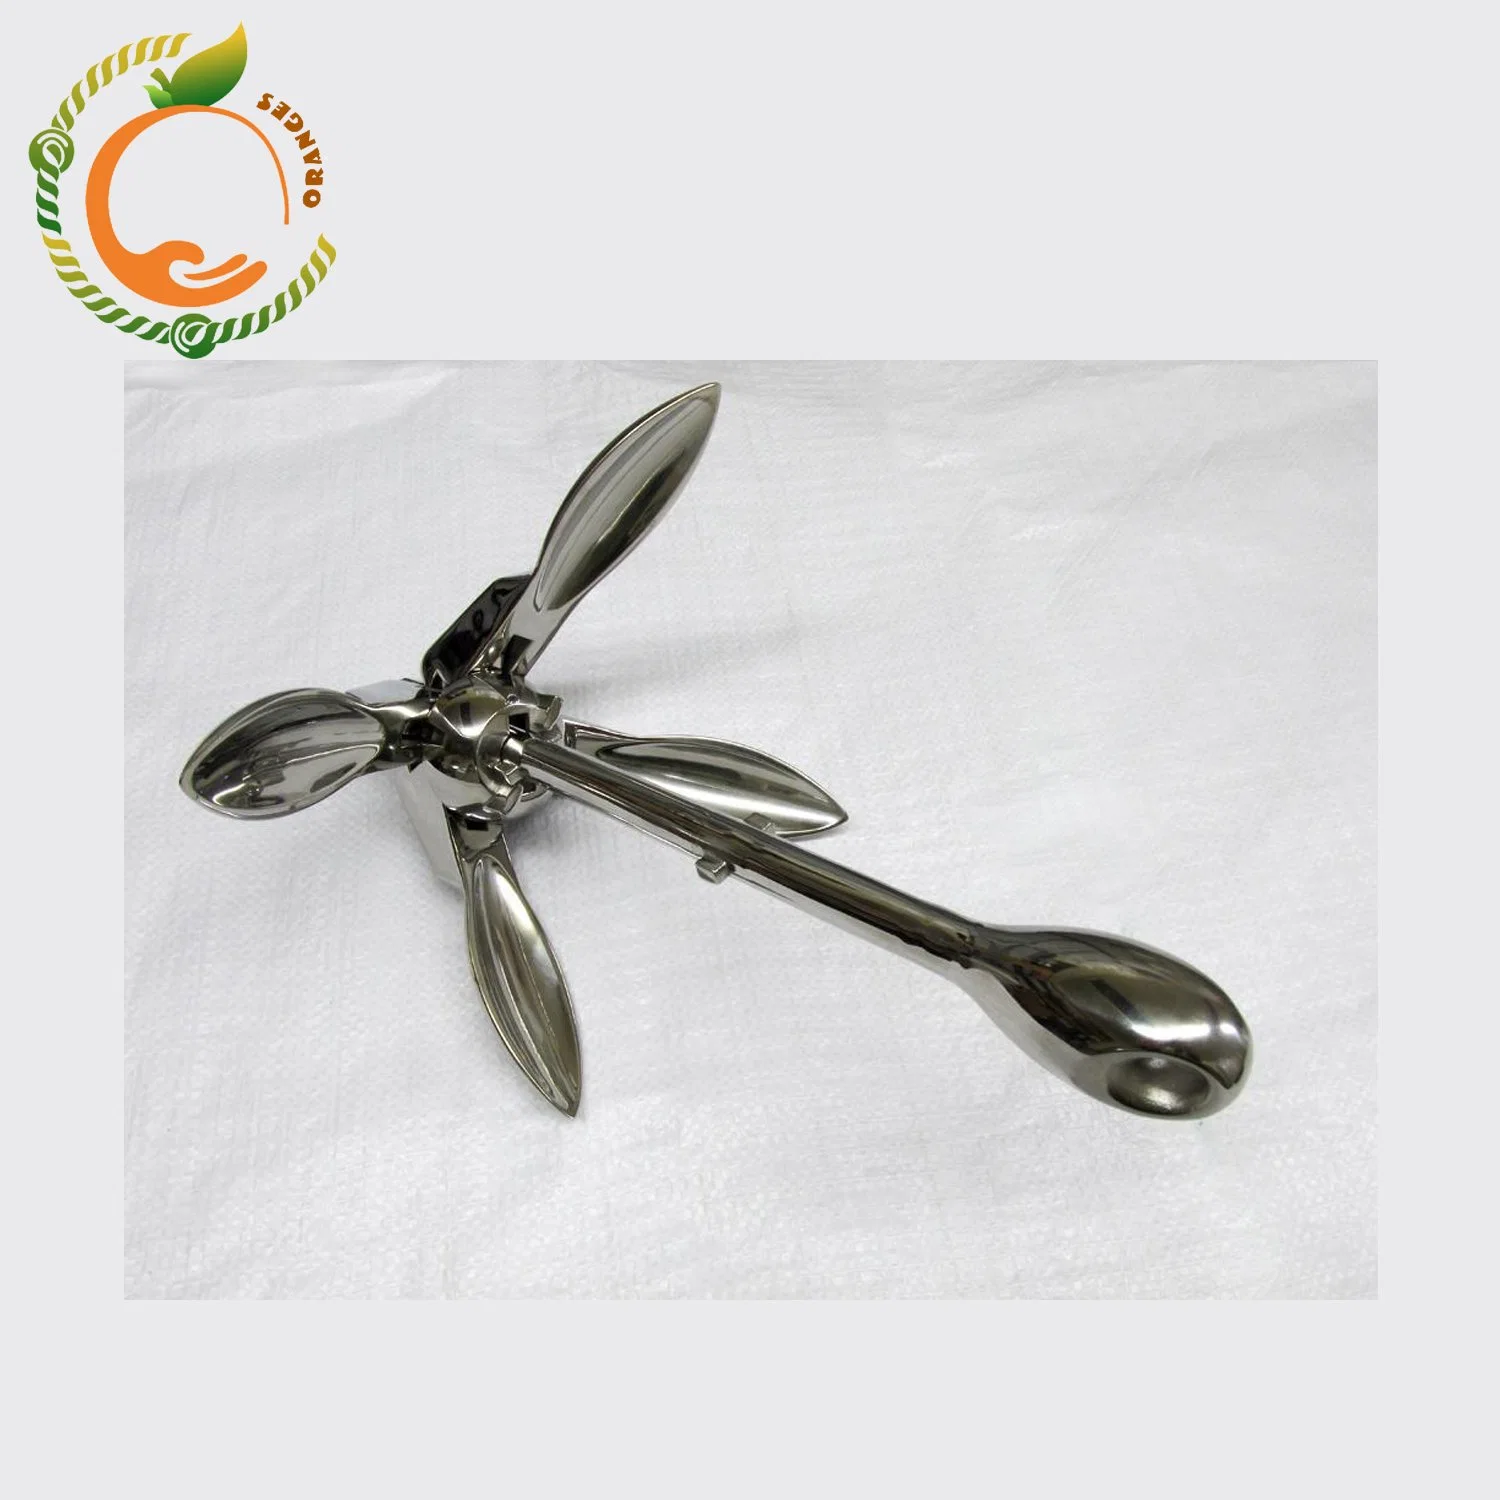 Boat Accessories Stainless Steel Folding Anchor/ Grapnel Type Anchor